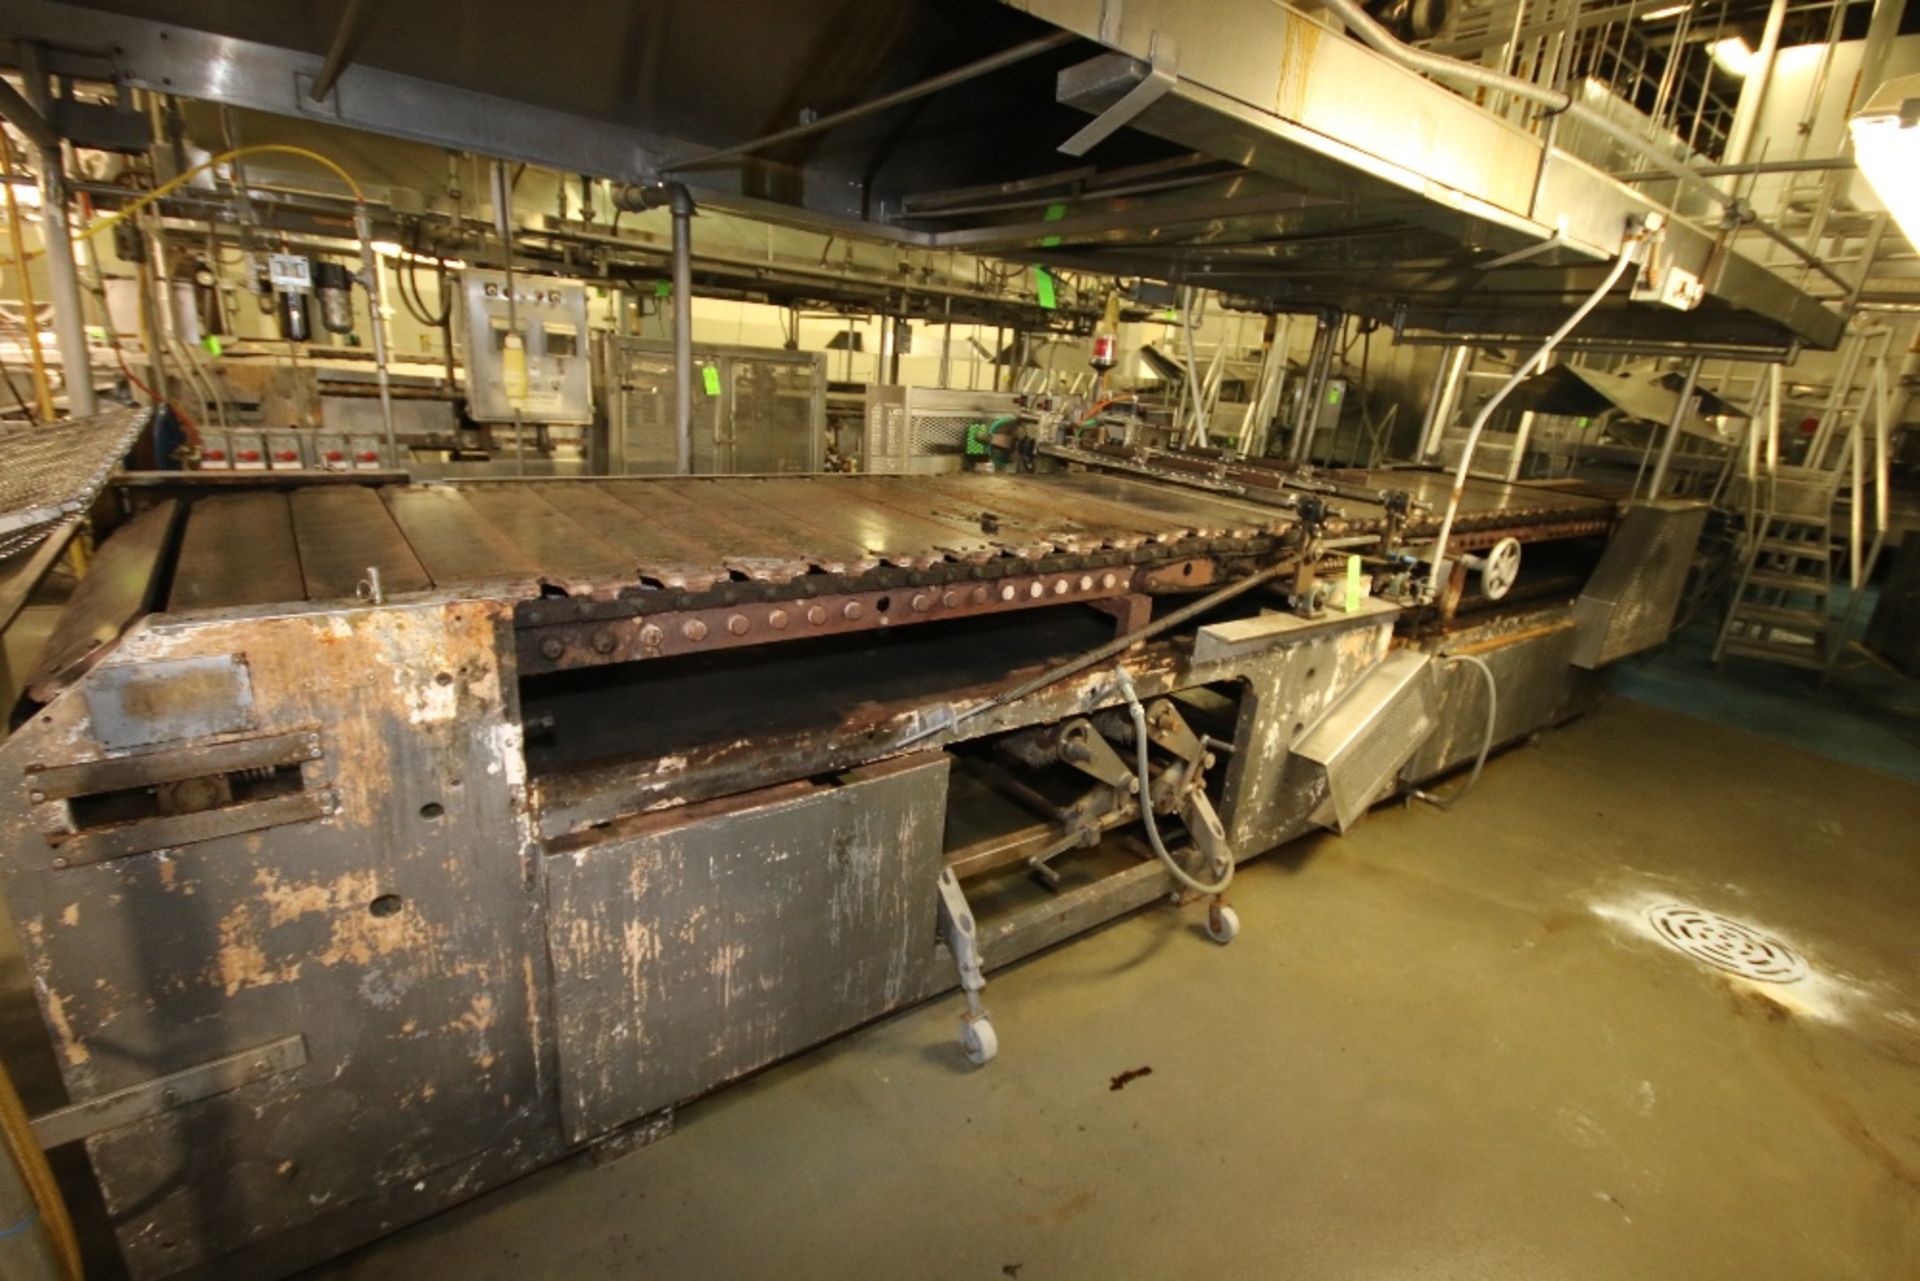 DeJersey Natural Gas Griddle/Oven with (76) 39" L Griddle Plates with Half Way Point Flipping - Image 4 of 4